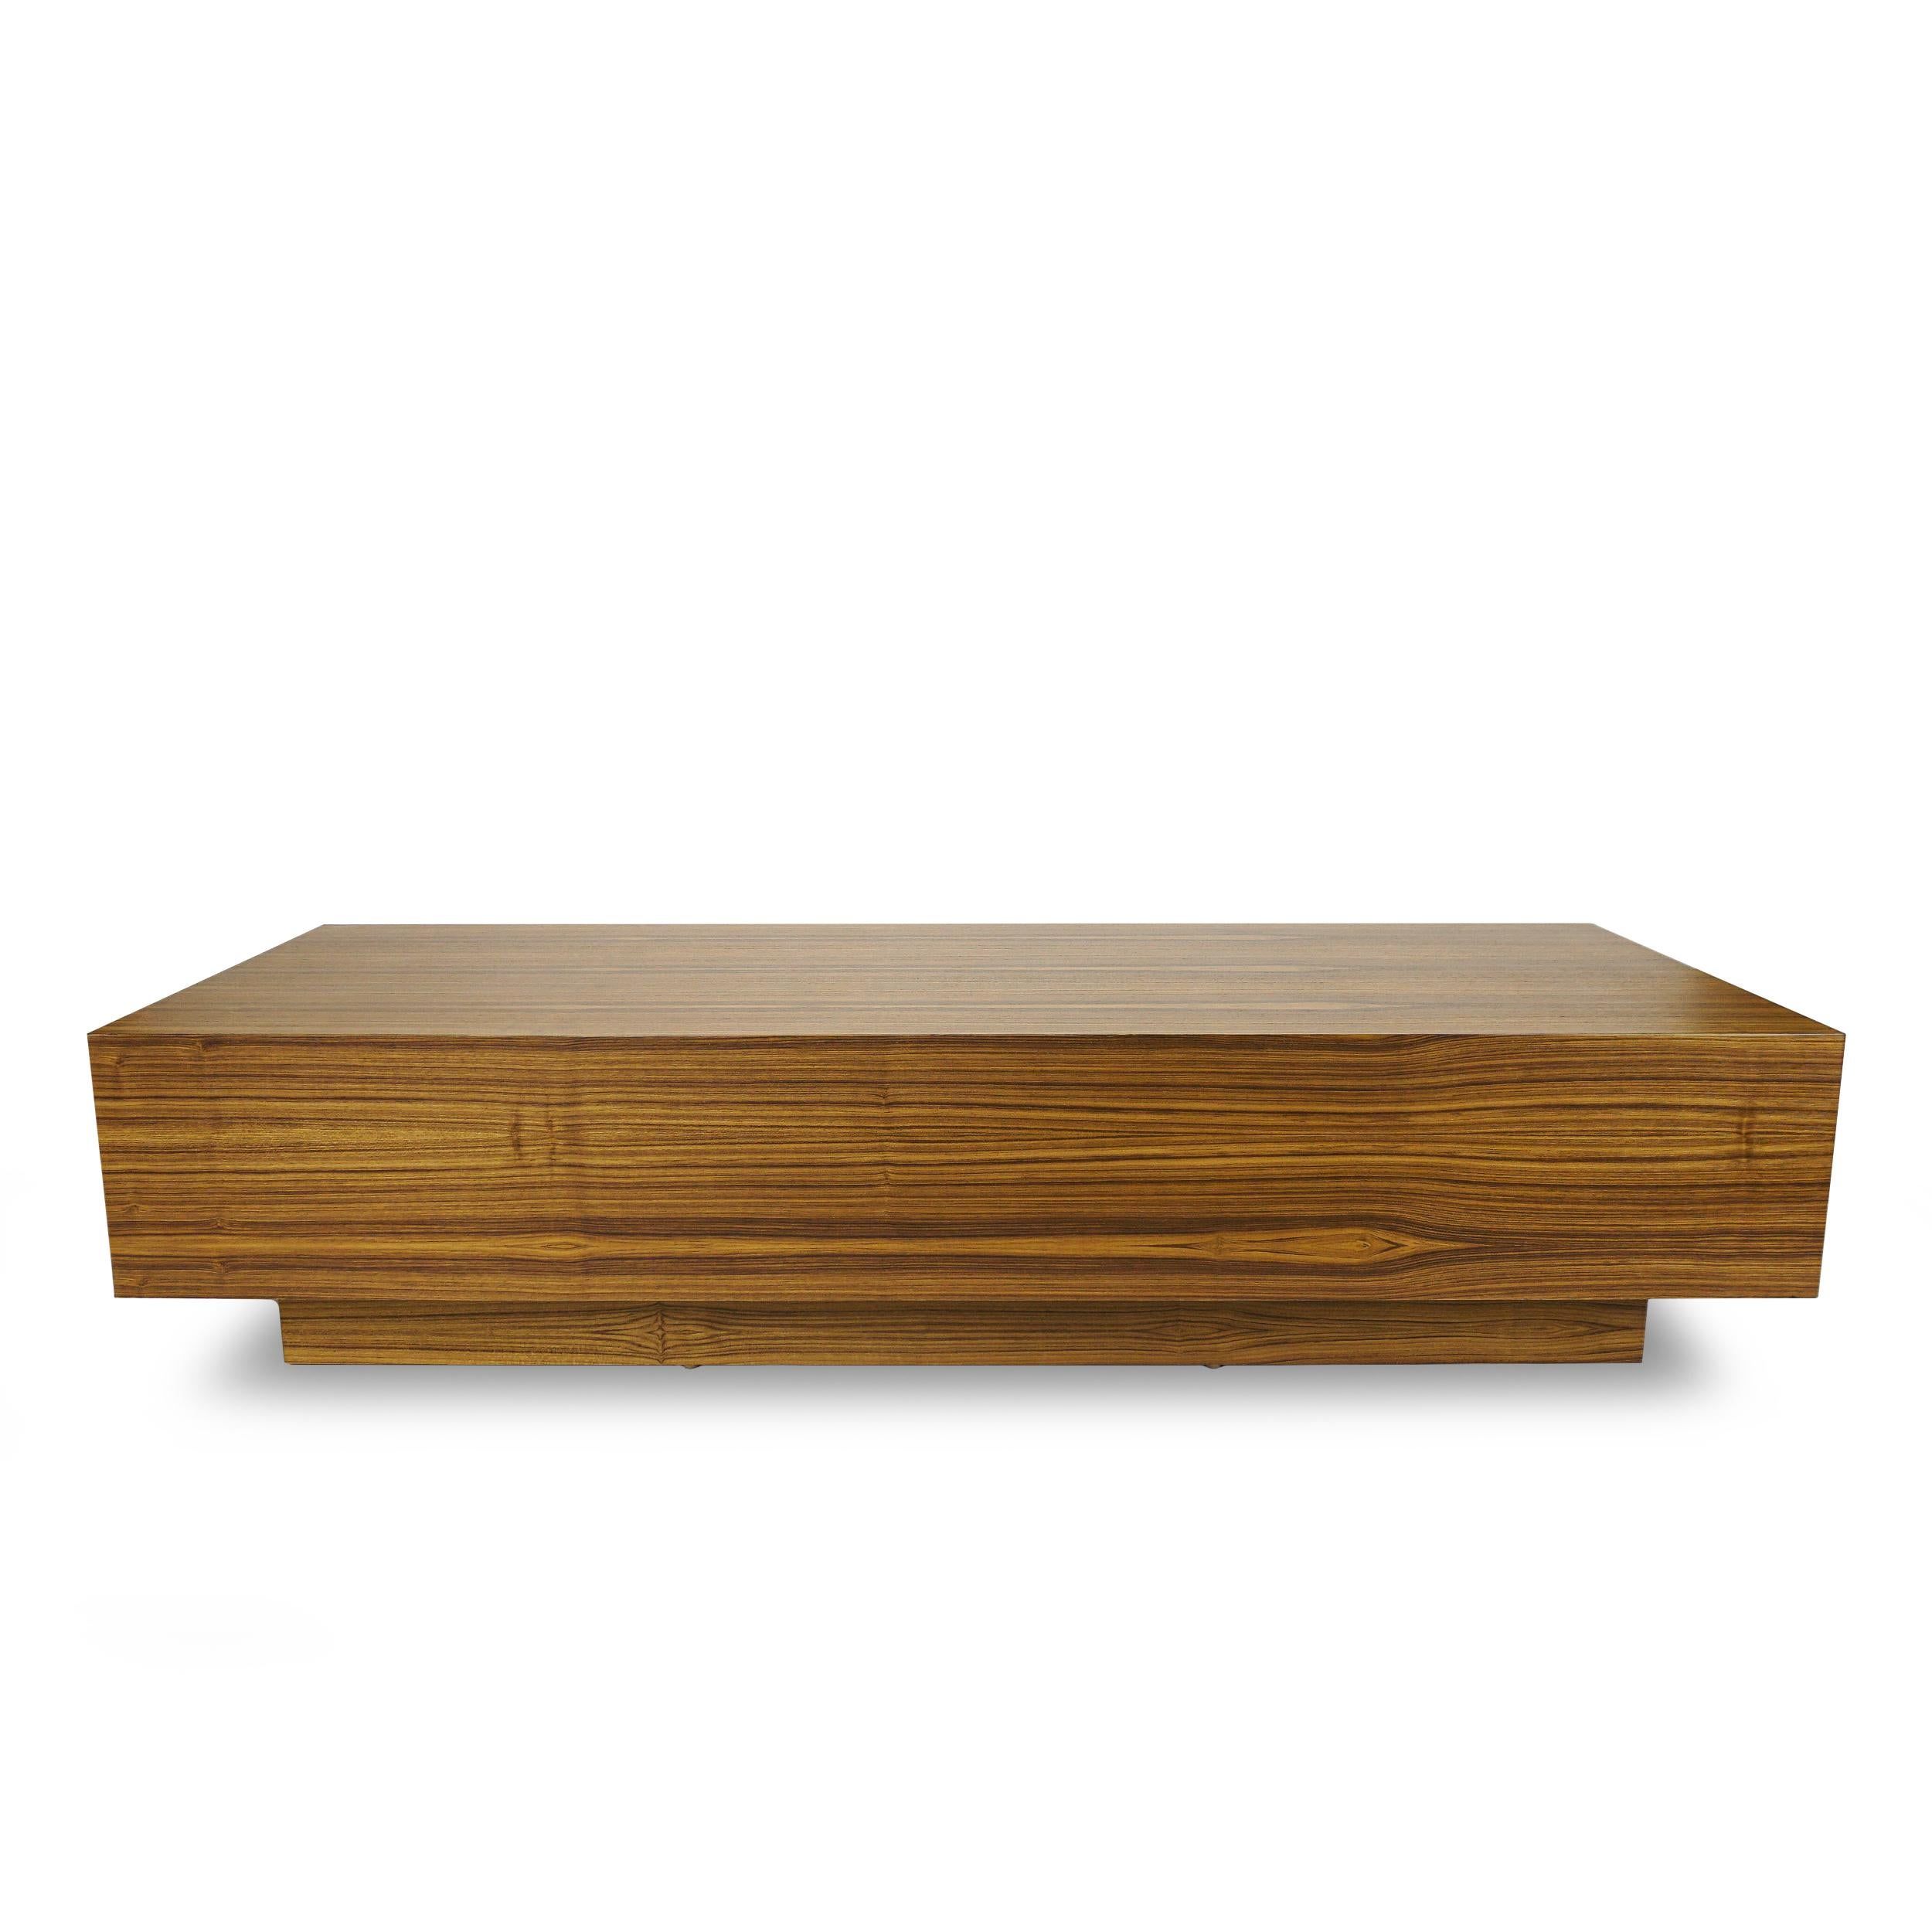 Sleek rectangular coffee table with tiger eye design teak veneer finish. Can be made in custom size. Ask for availability of piece as shown. 

Measurements:
Overall: 70”W x 30”D x 16”H

Price as shown: $3,880
Customization may change price.

How We